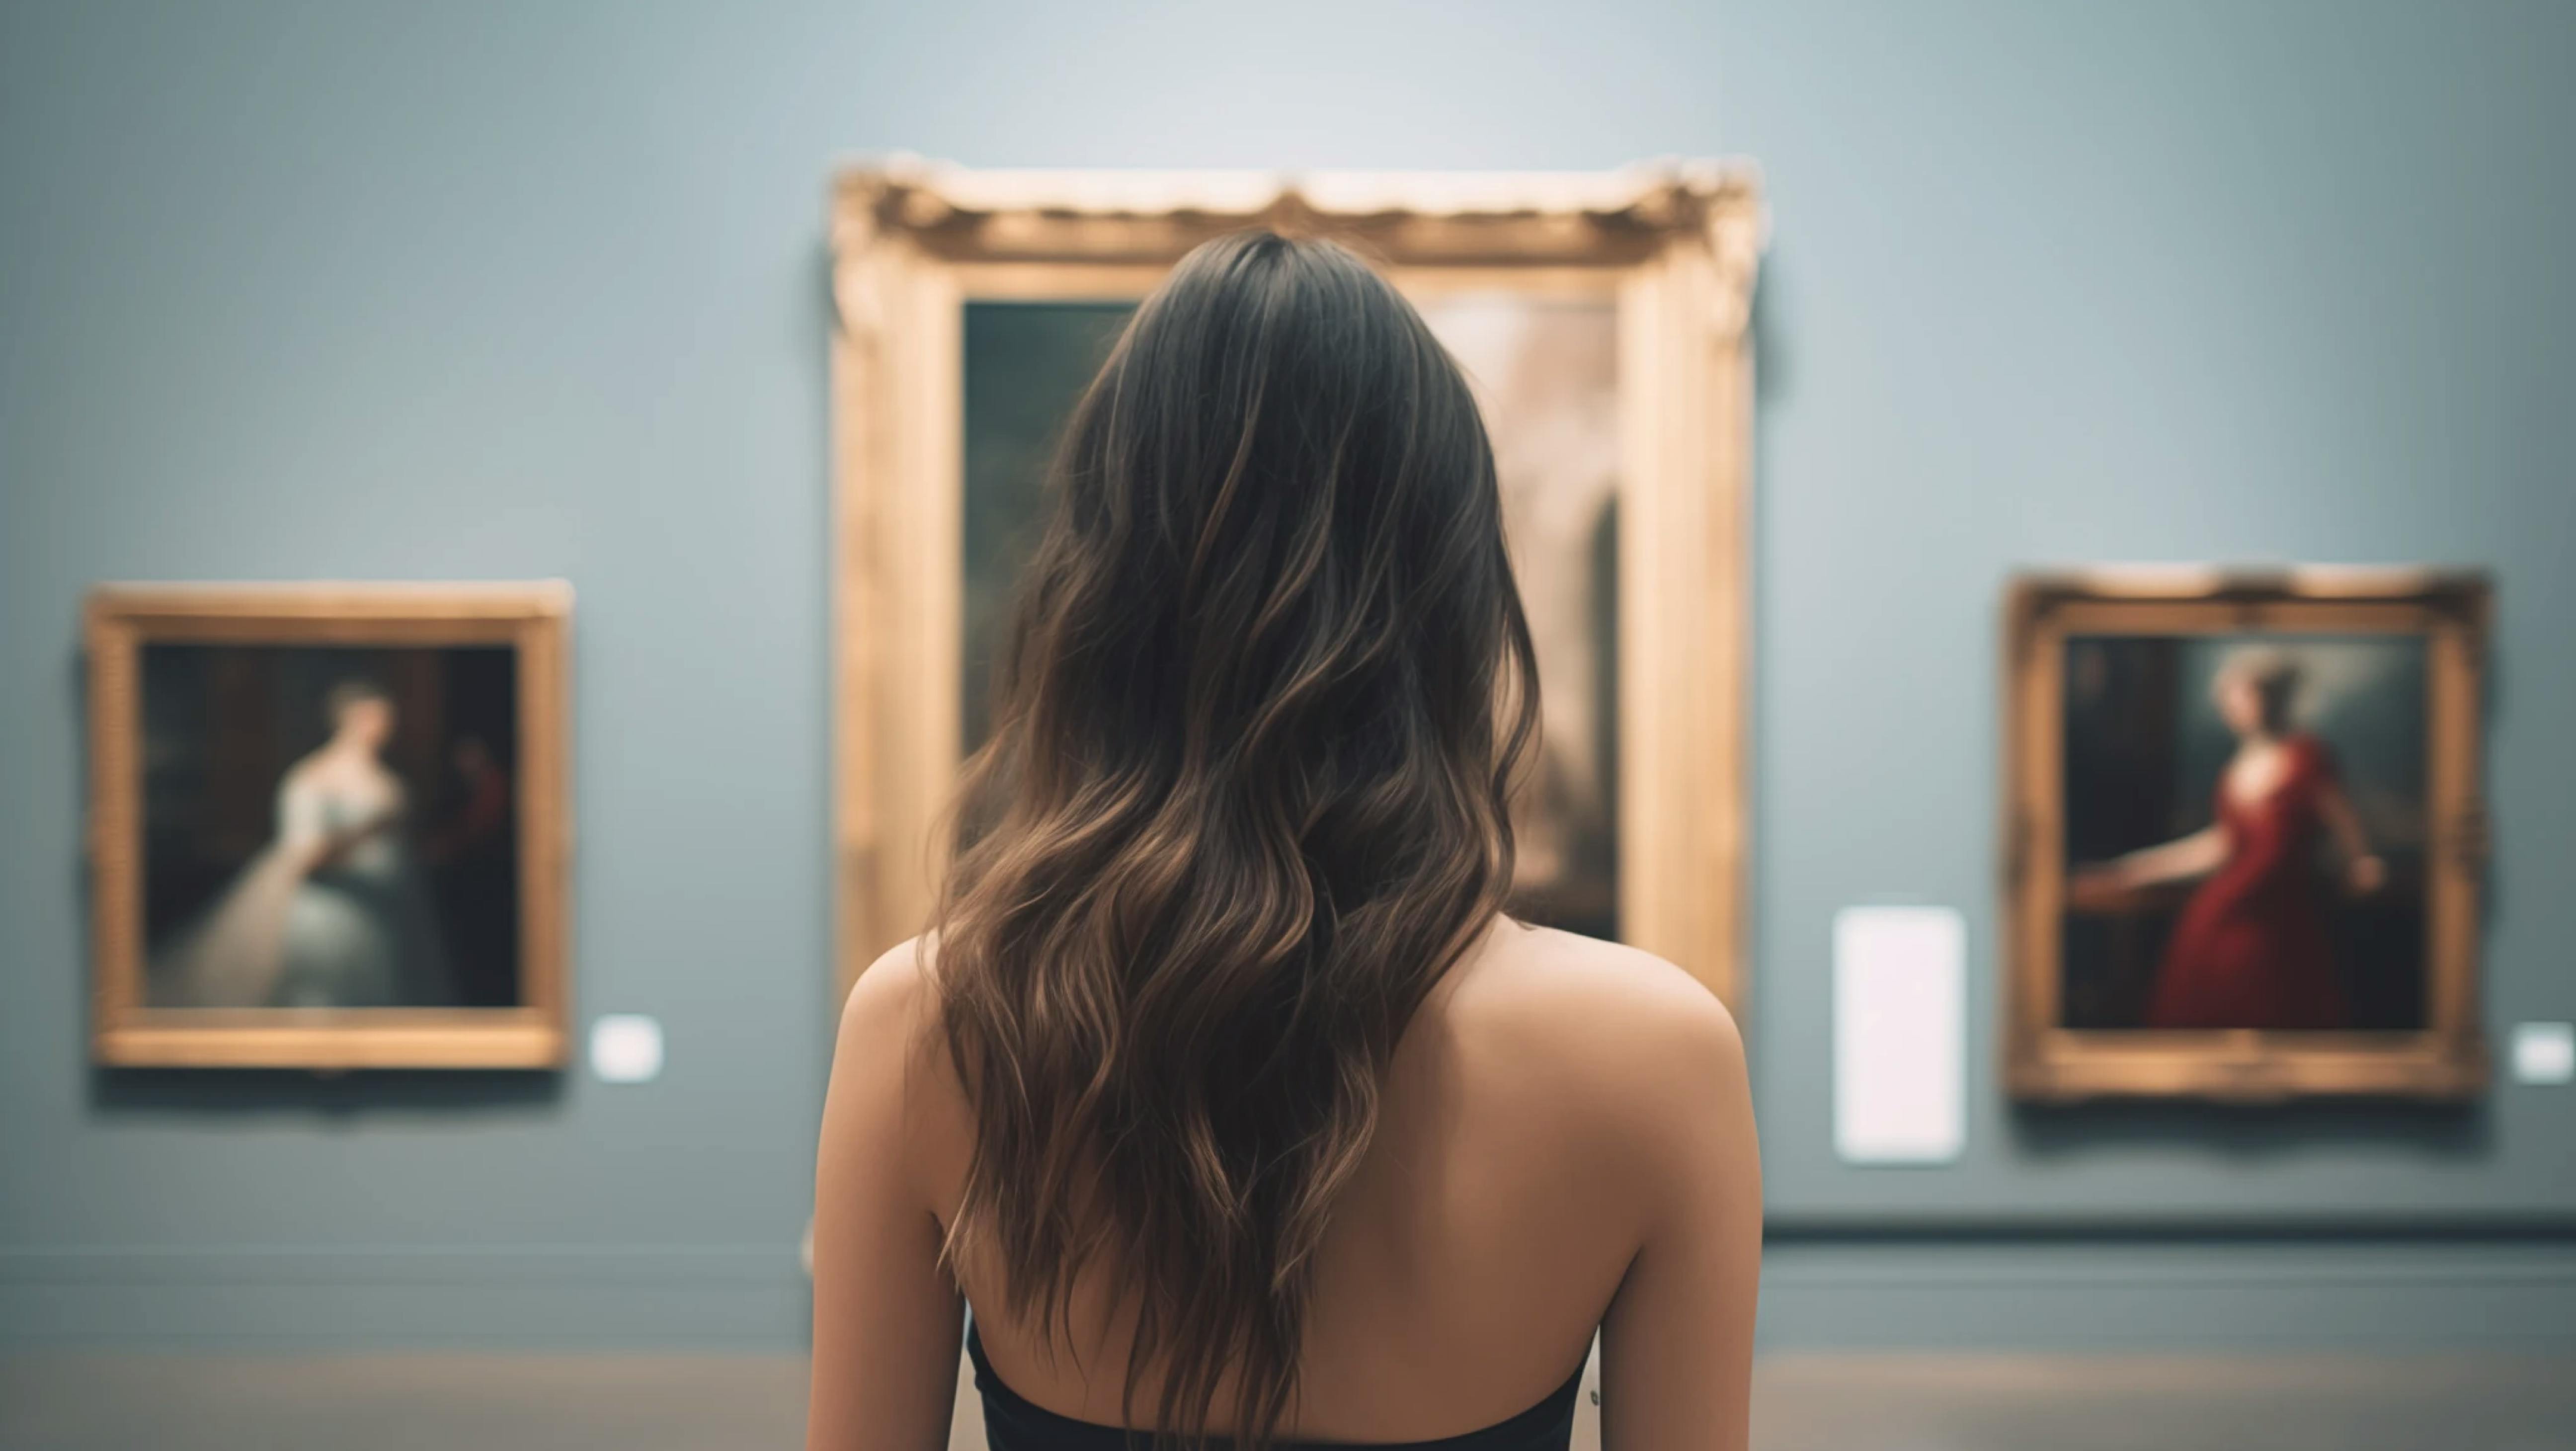 A woman looking at 3 paintings in a museum